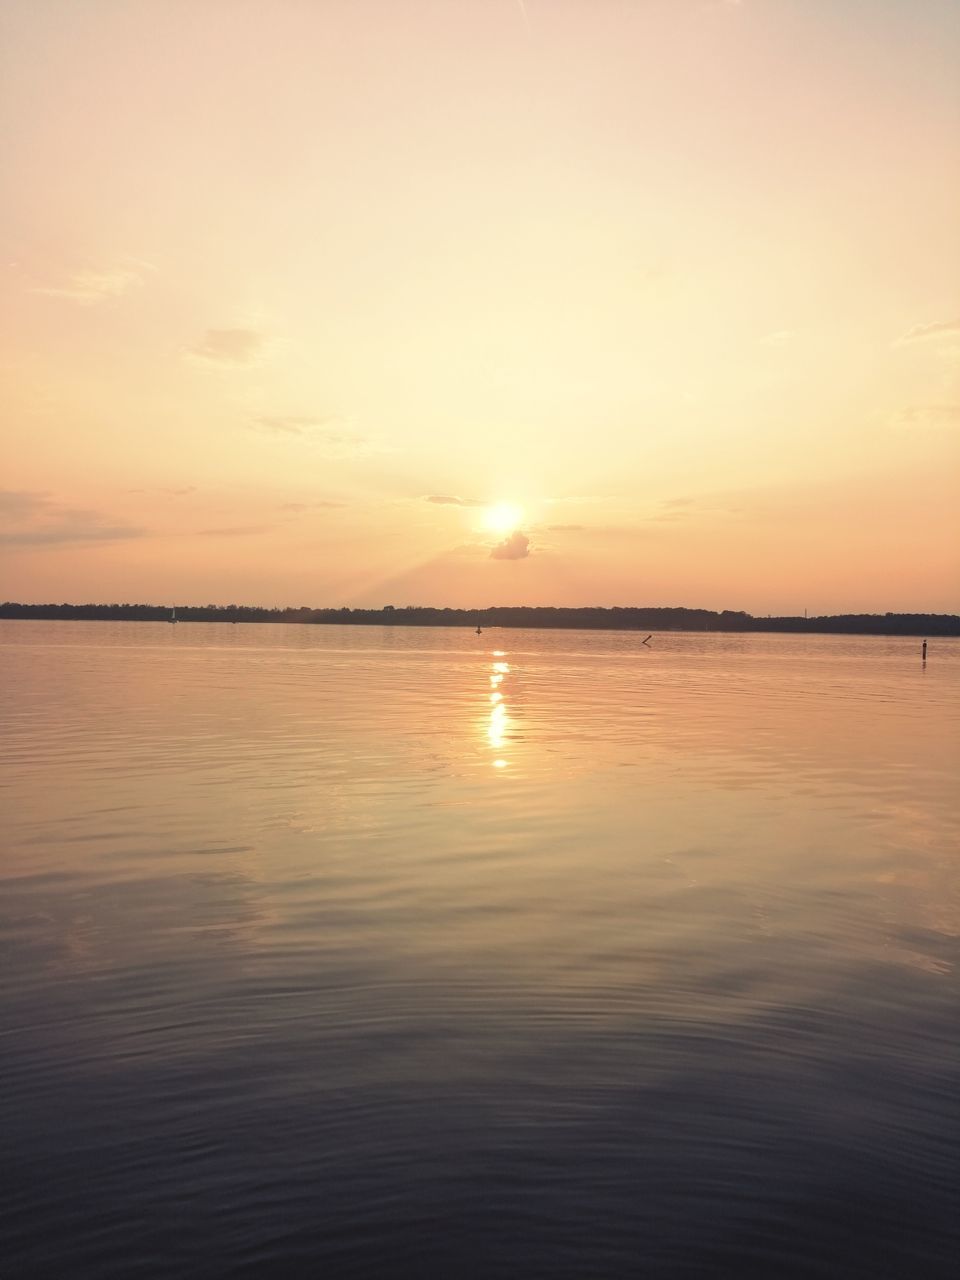 sky, sunset, water, scenics - nature, beauty in nature, tranquility, tranquil scene, reflection, waterfront, sea, idyllic, orange color, nature, non-urban scene, no people, cloud - sky, sun, outdoors